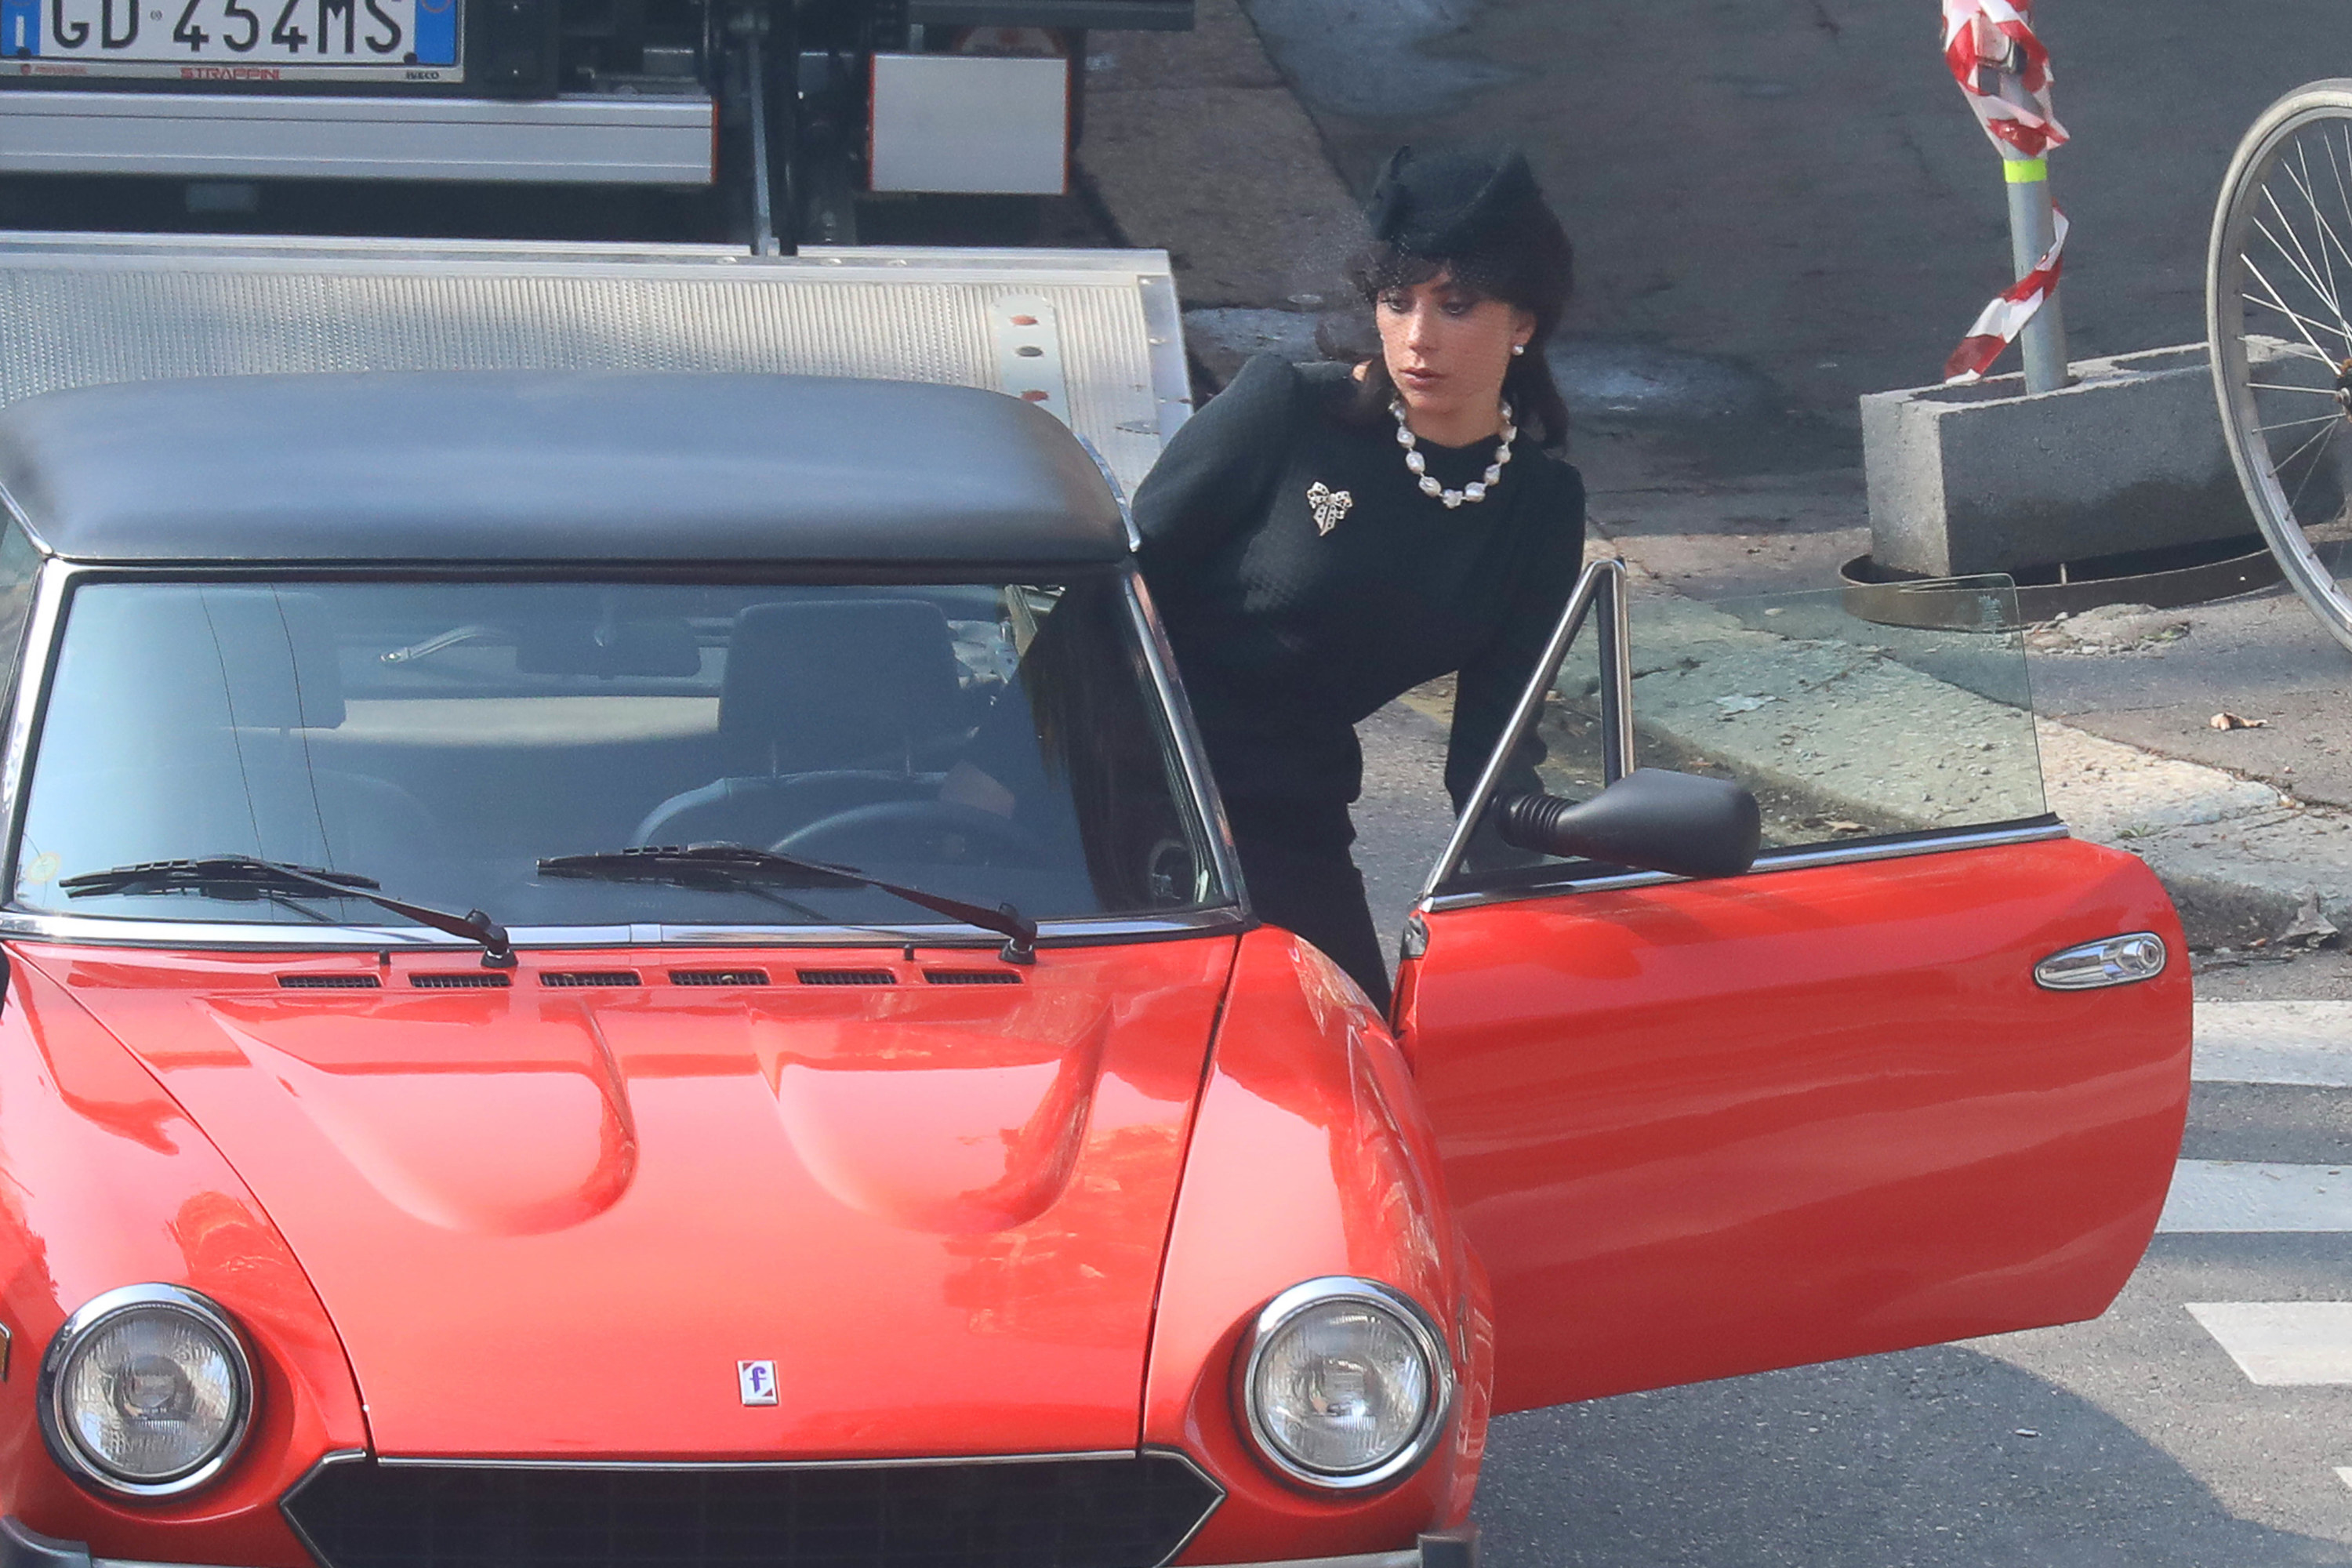 Gaga gets into a car while filming a scene in Italy